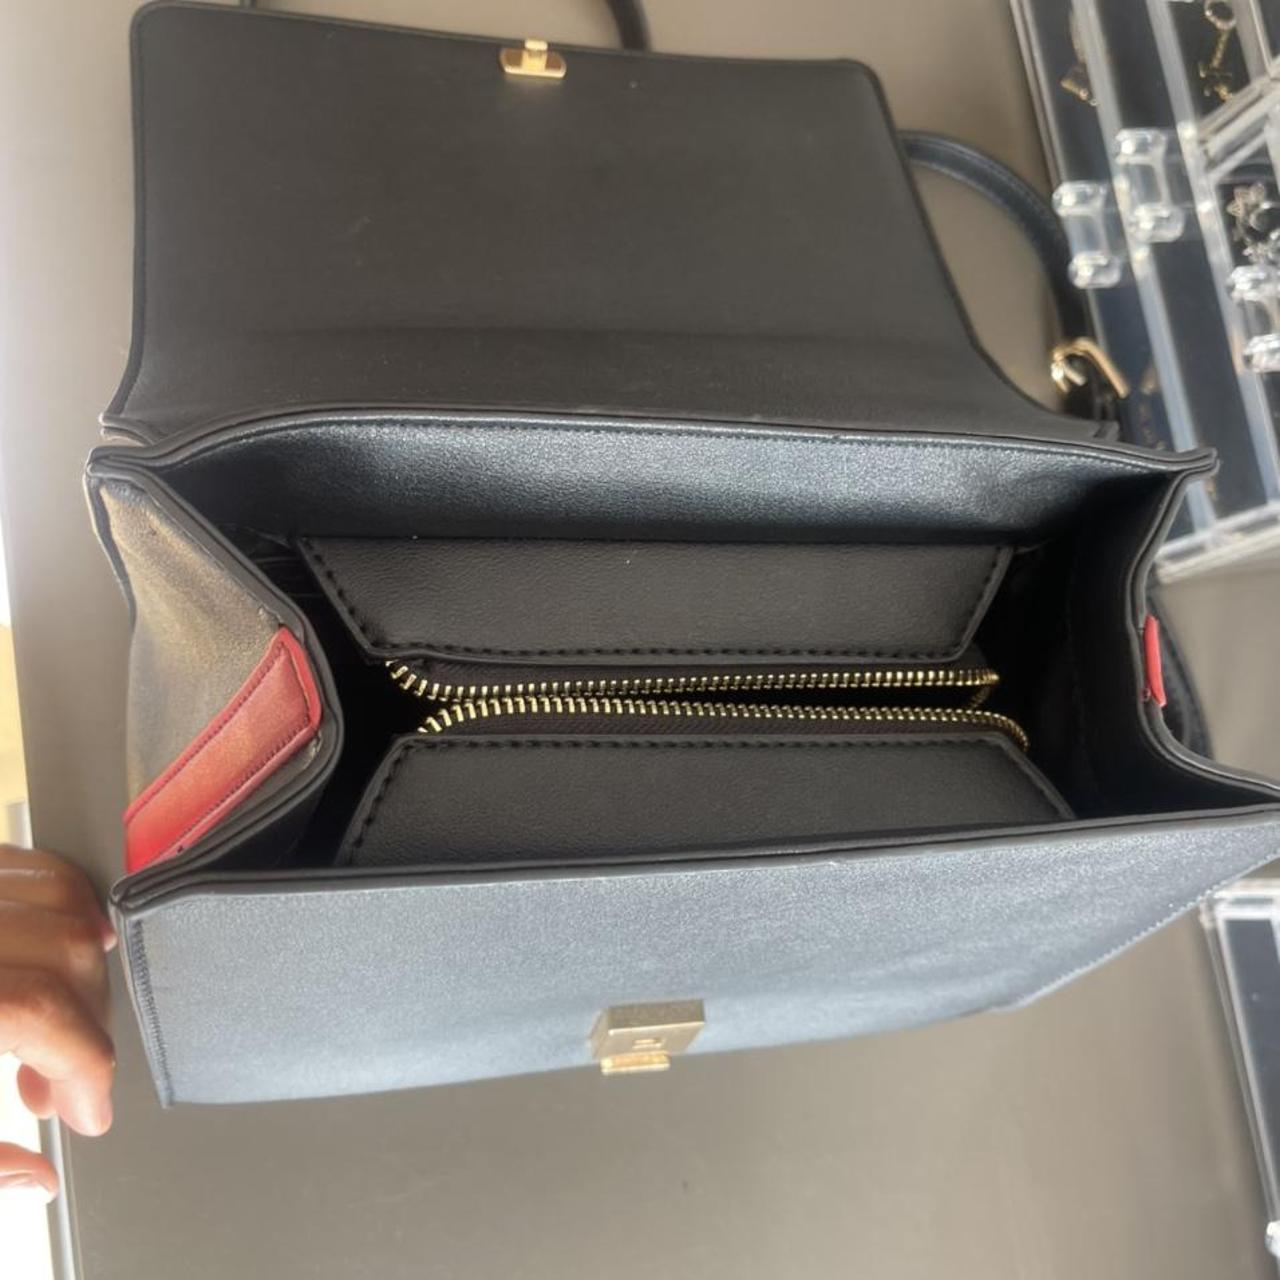 Valentino Women's Black and Red Bag | Depop